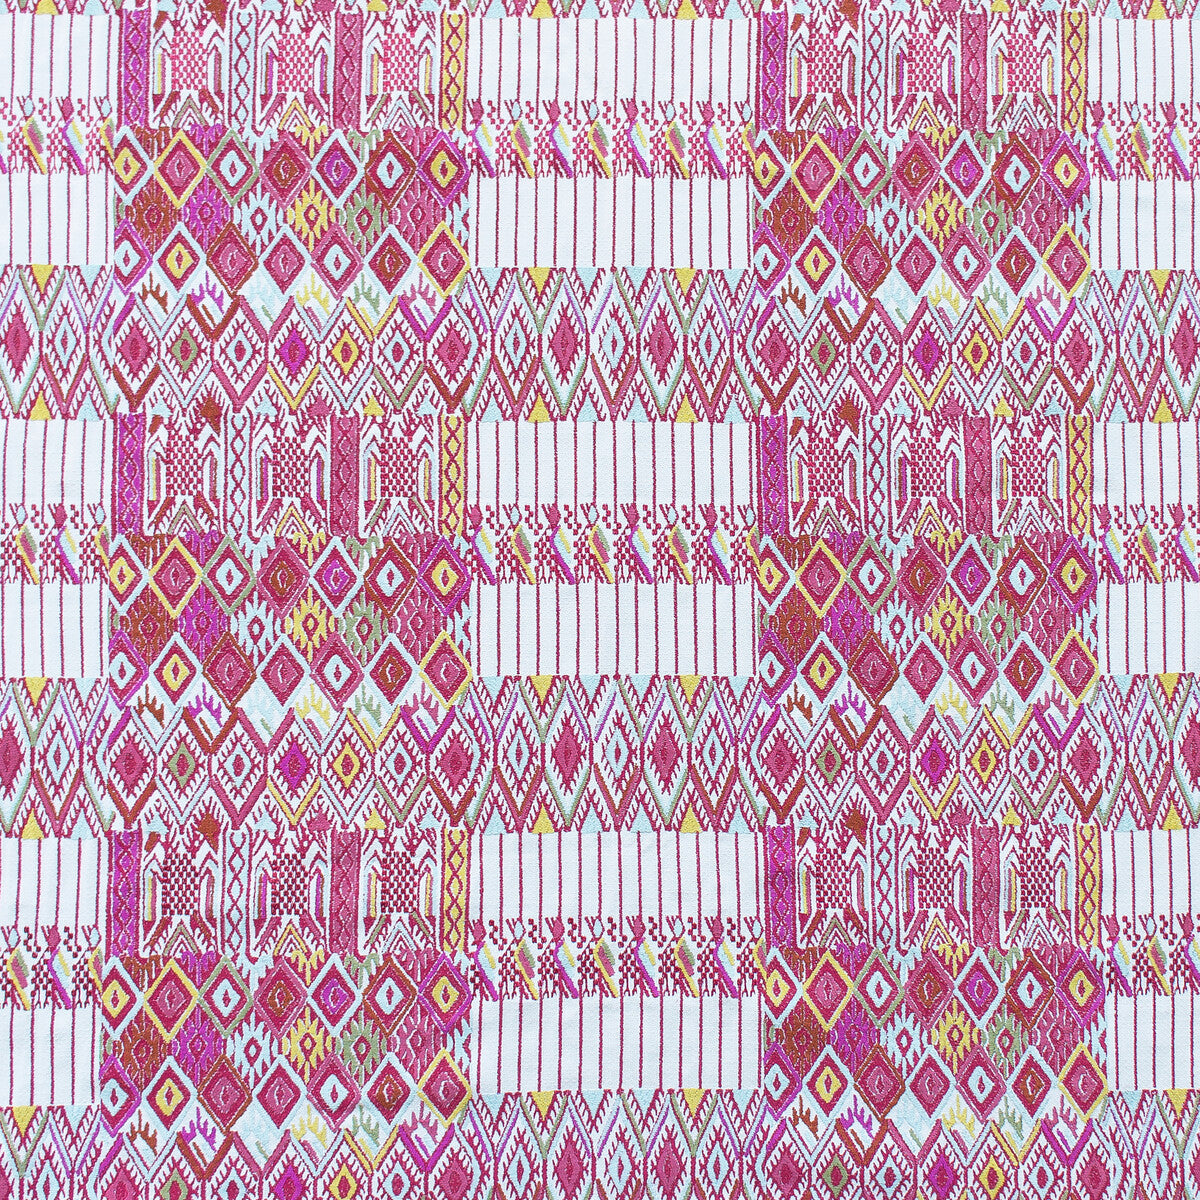 Huipil fabric in rosa/verde color - pattern GDT5564.001.0 - by Gaston y Daniela in the Gaston Nuevo Mundo collection